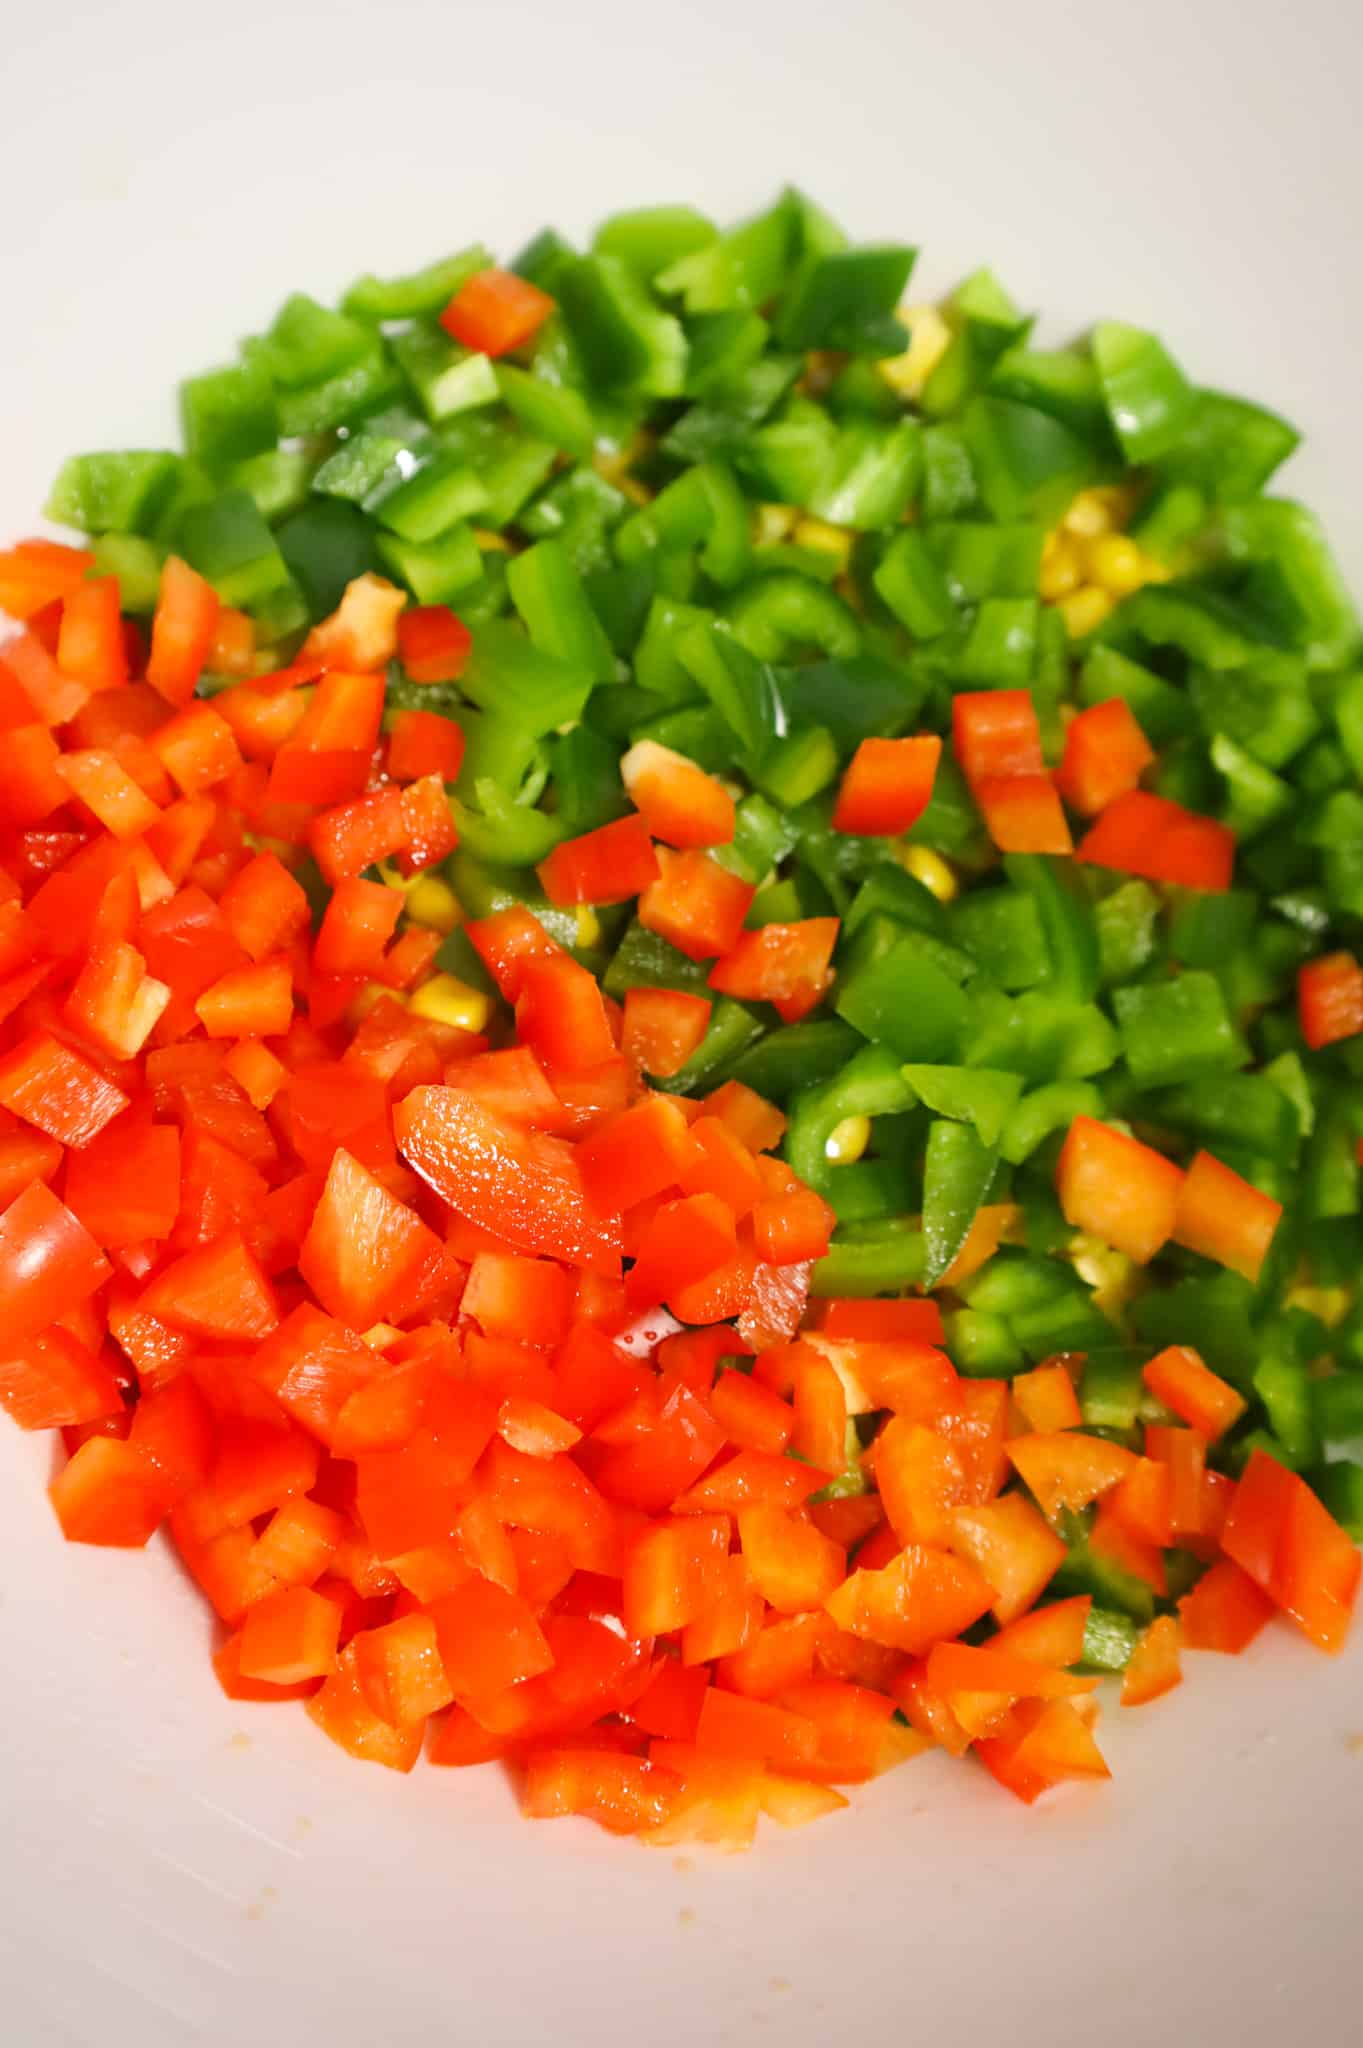 diced red and green bell peppers in a mixing bowl